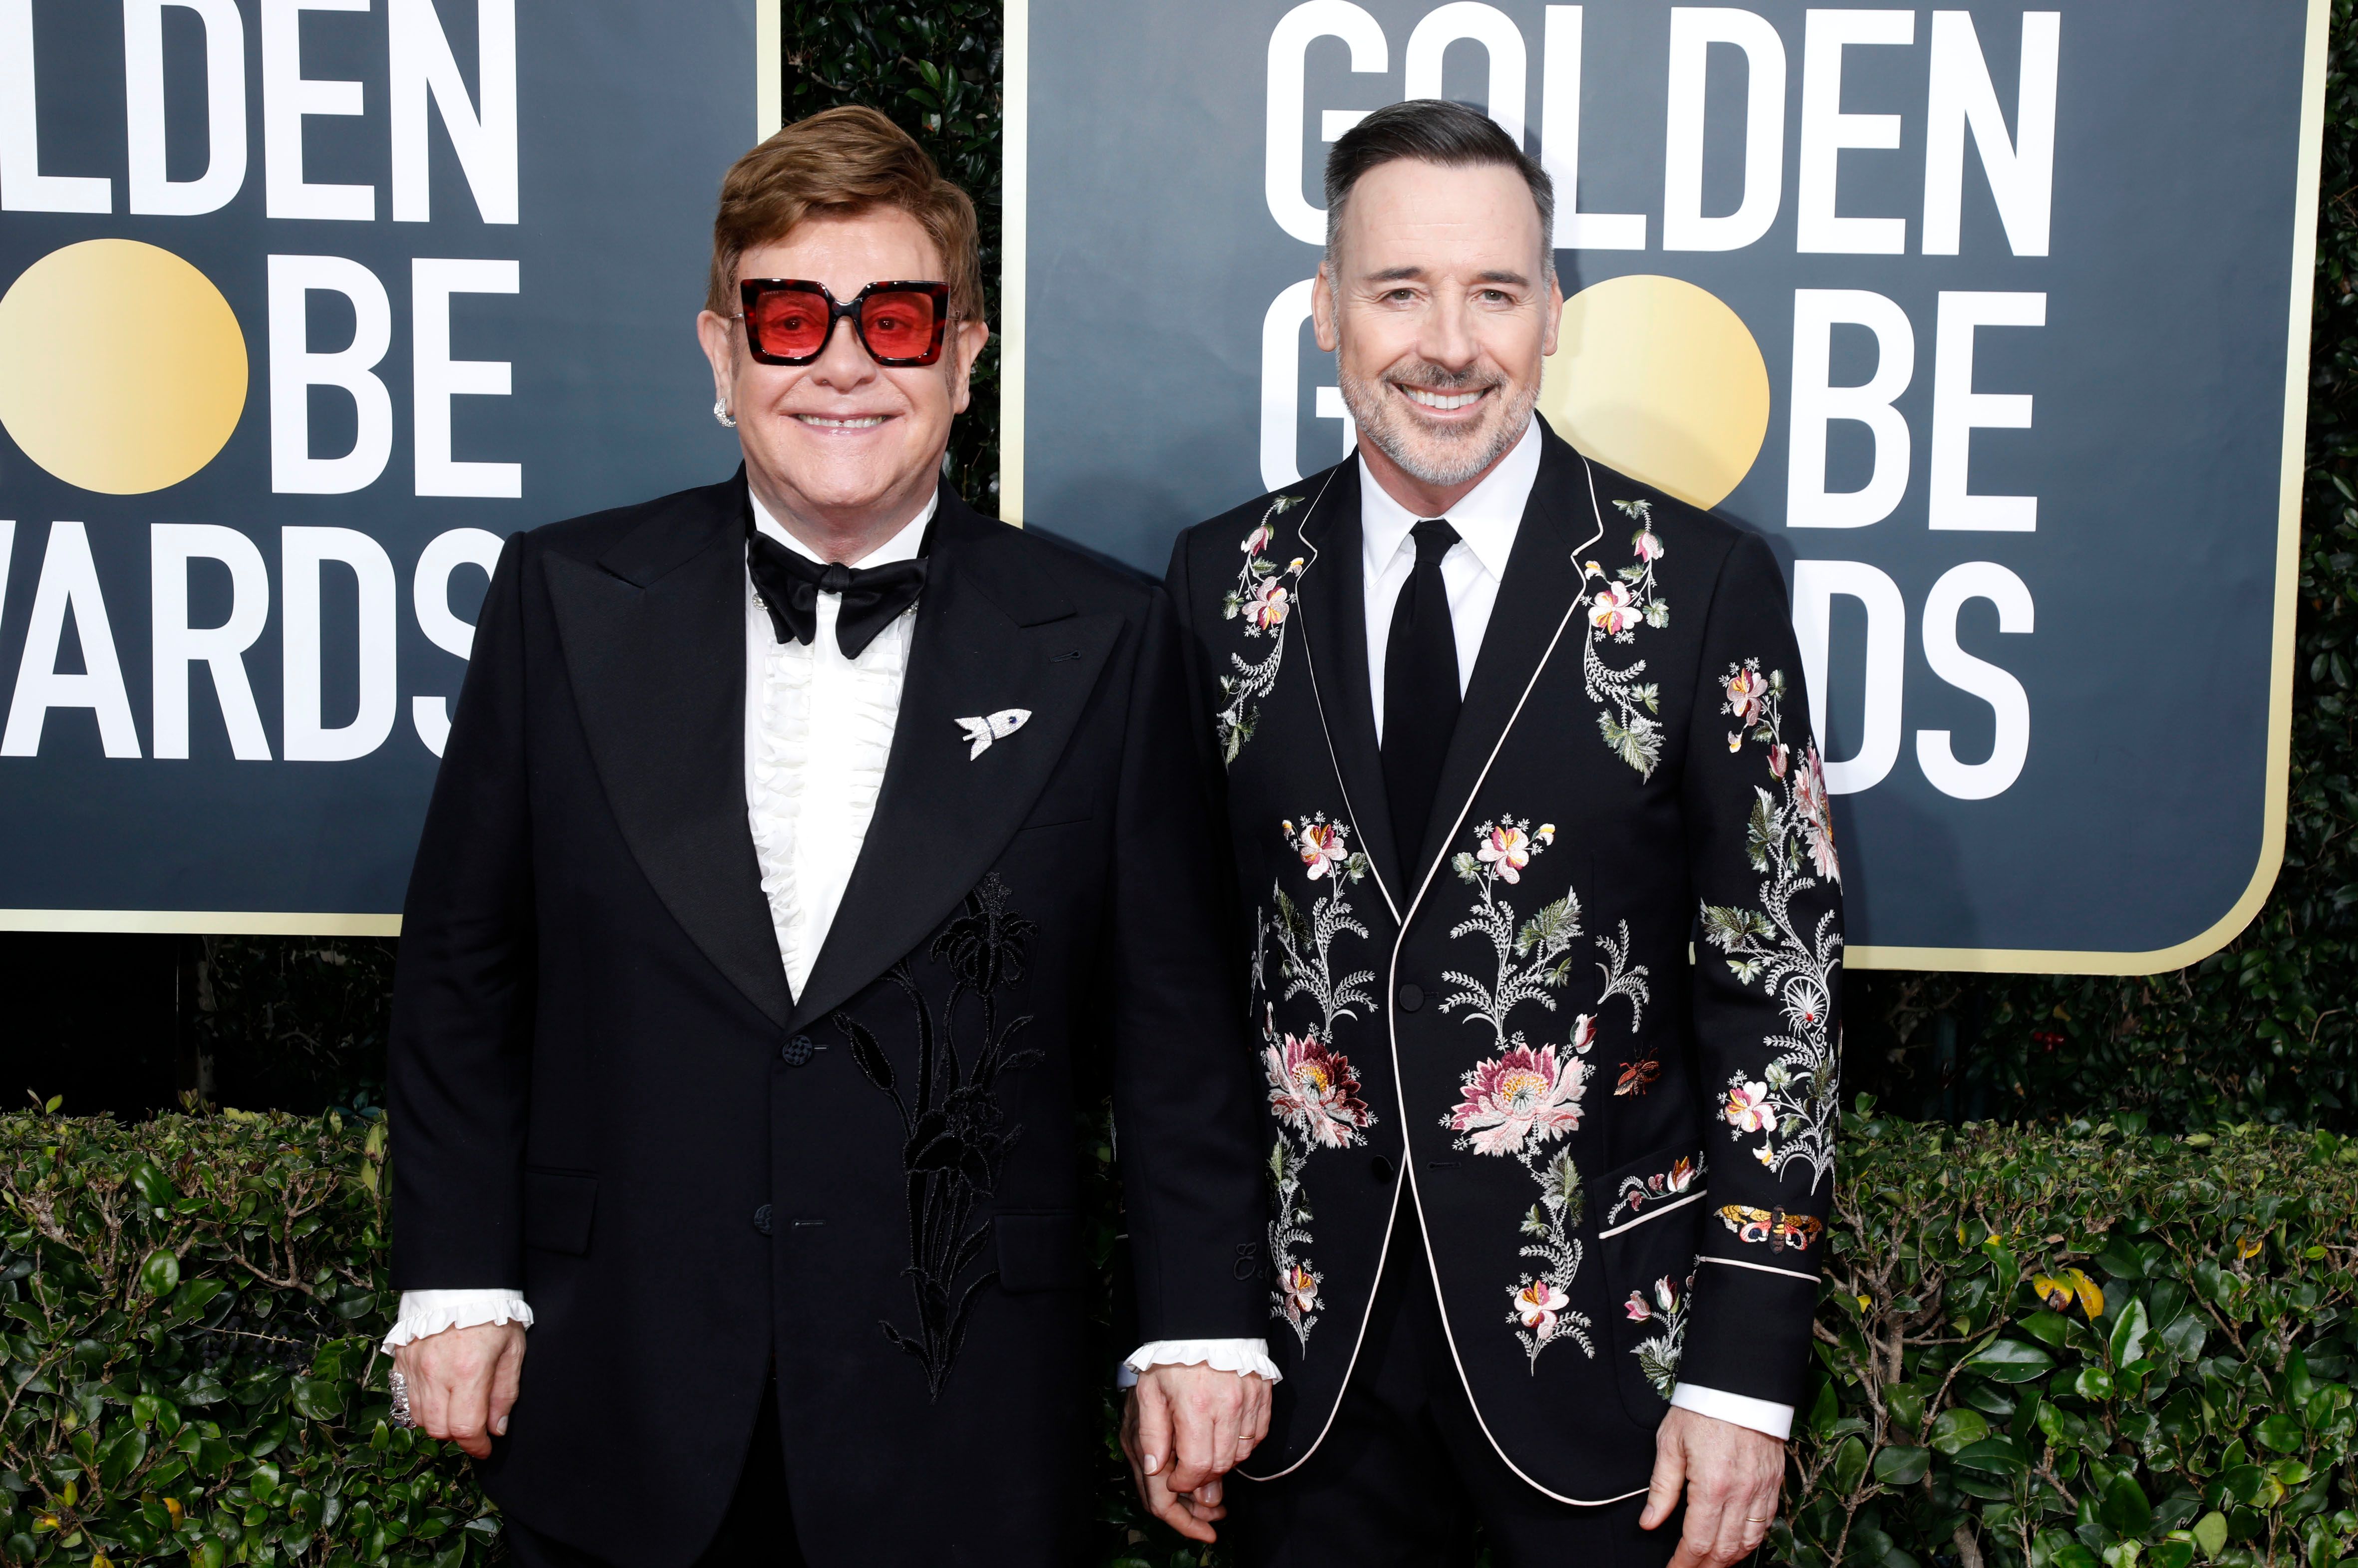 Elton John and David Furnish at the 77th Annual Golden Globe Awards on January 05, 2020, in Beverly Hills, California | Photo: P. Lehman/Barcroft Media/Getty Images